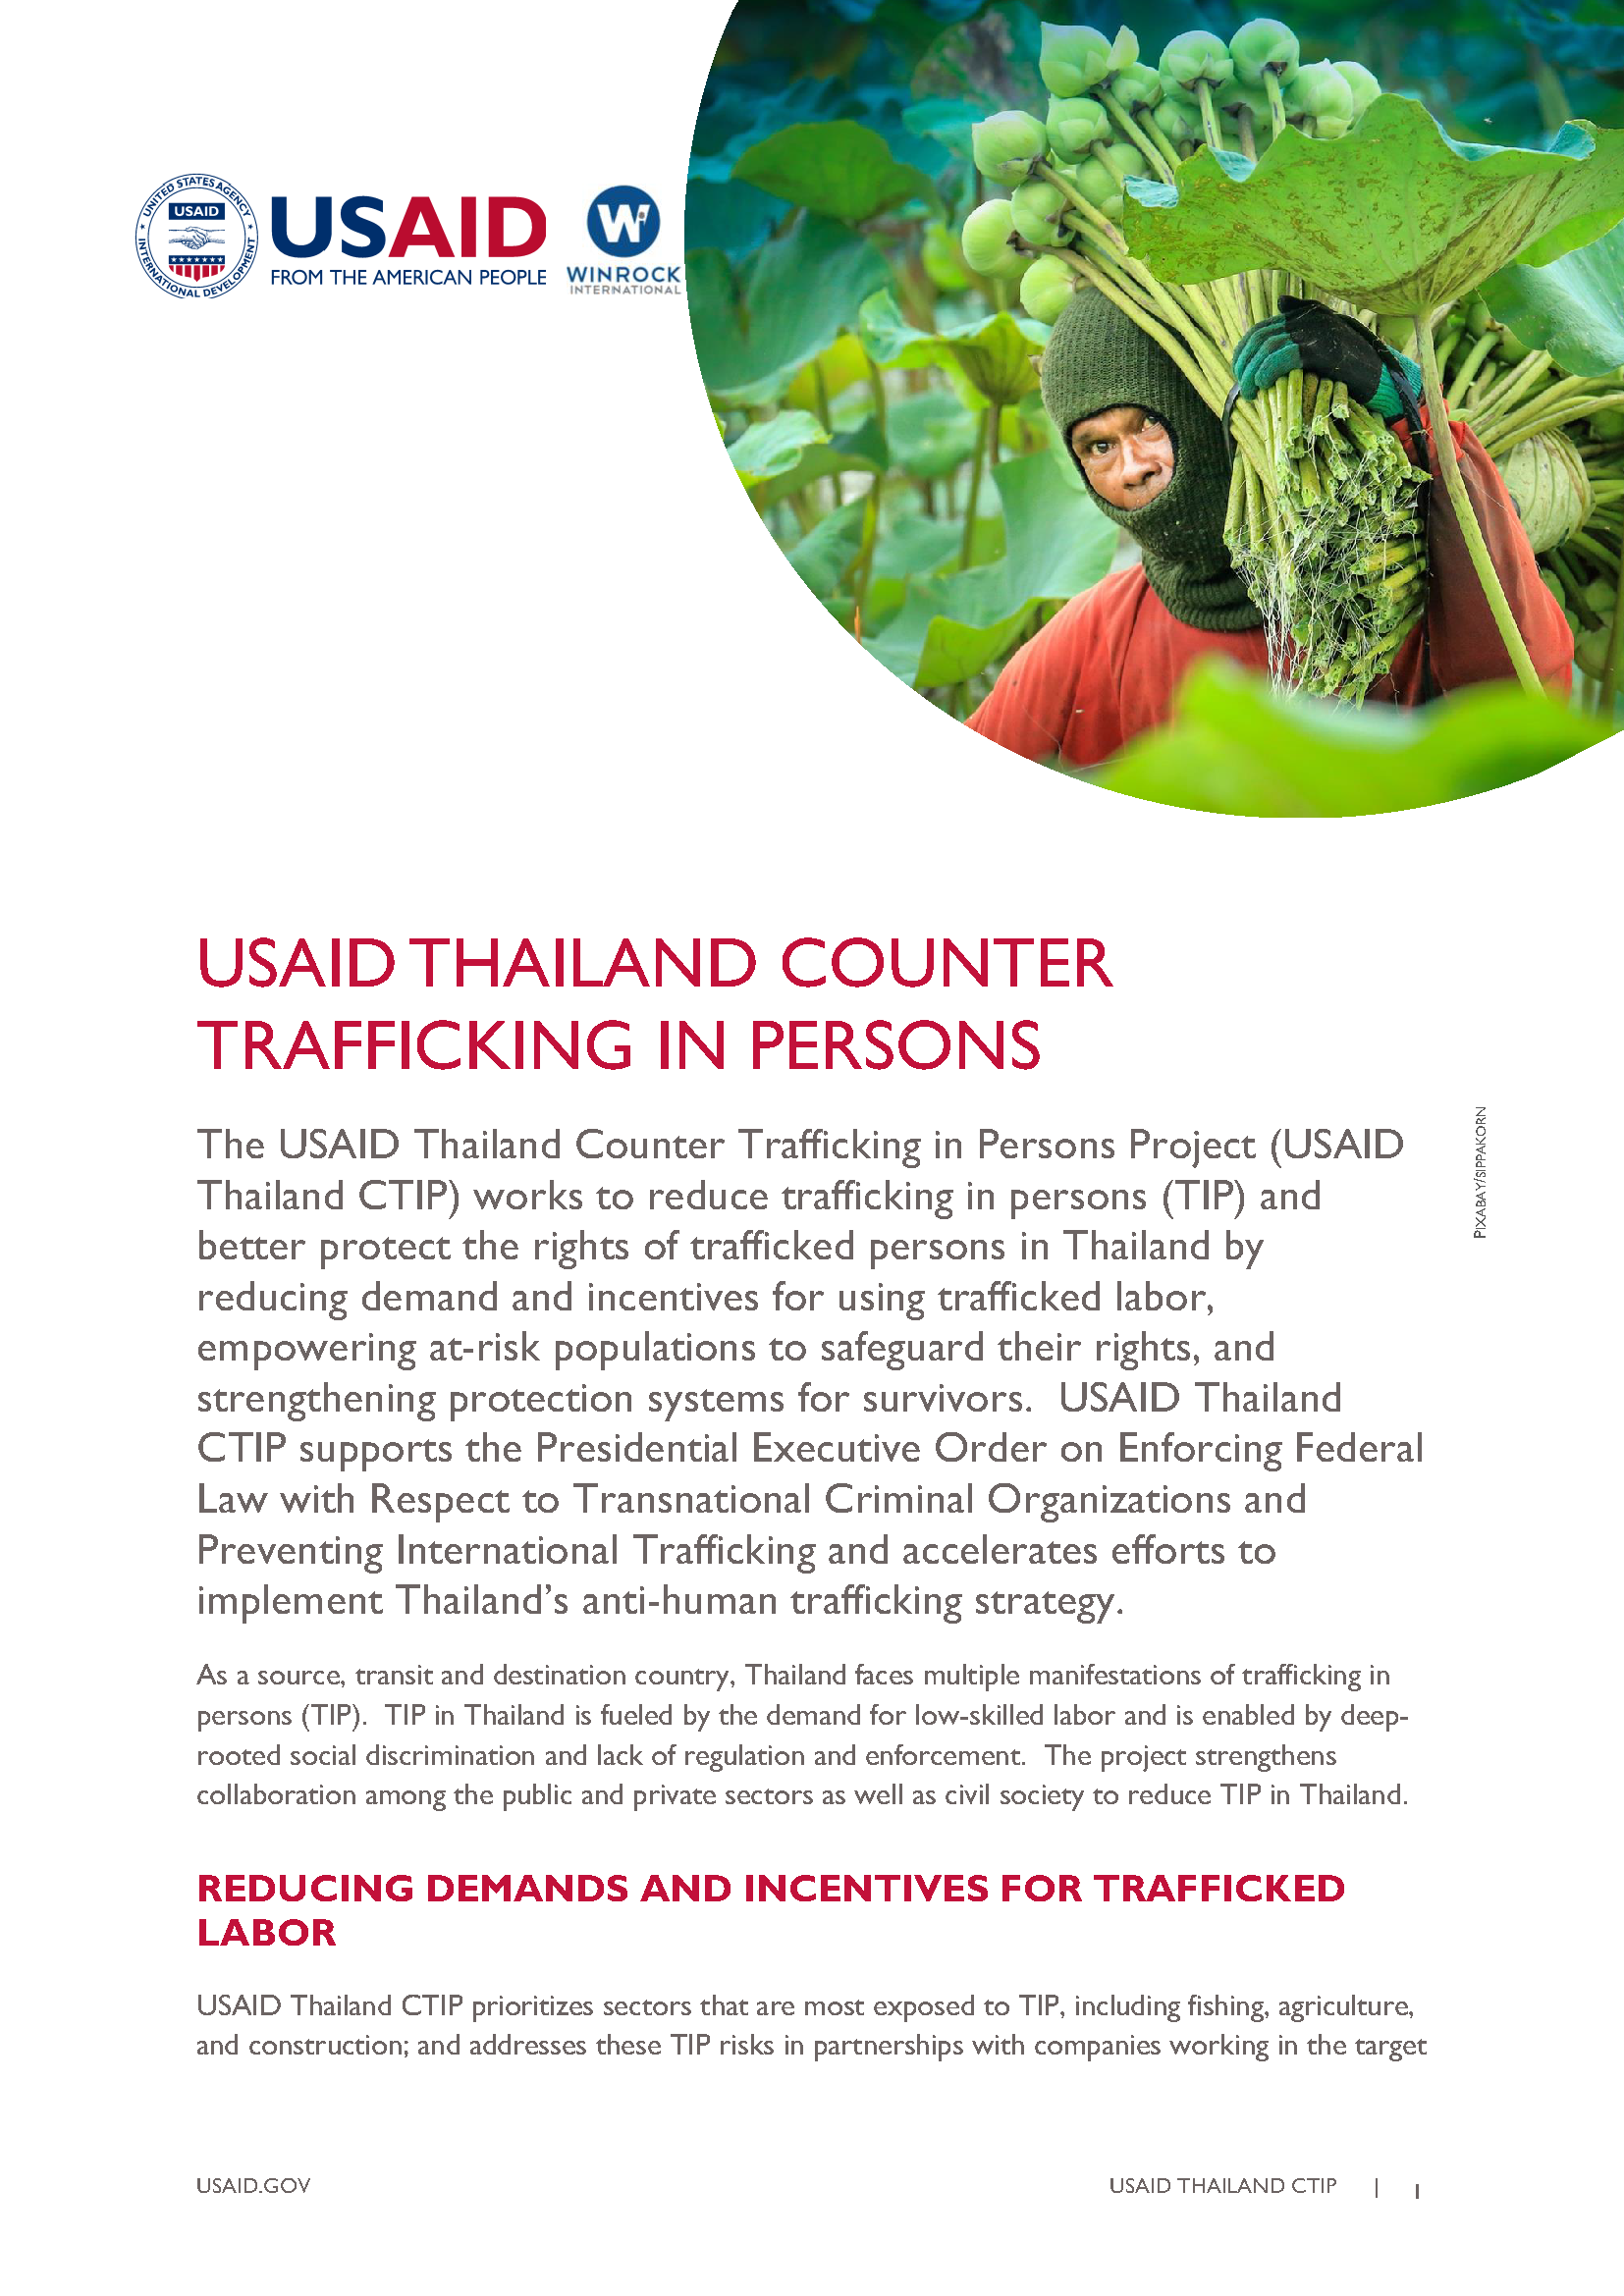 USAID Thailand Counter Trafficking in Persons